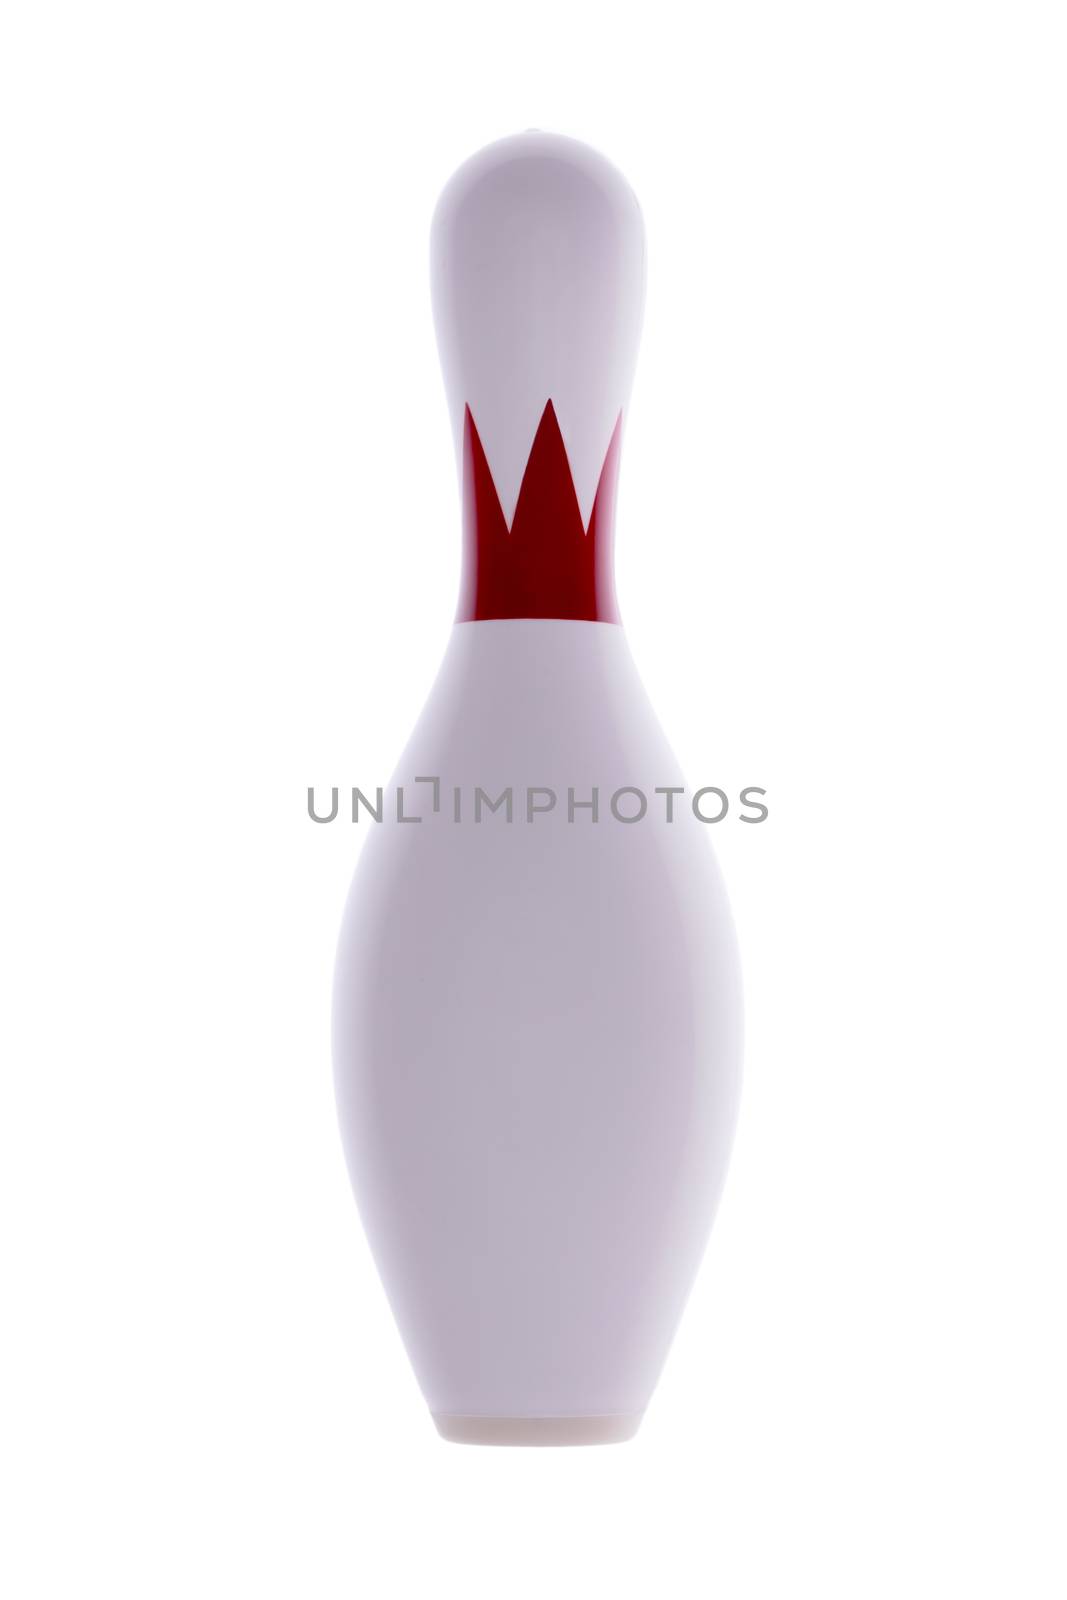 Single isolated bowling pin by coskun